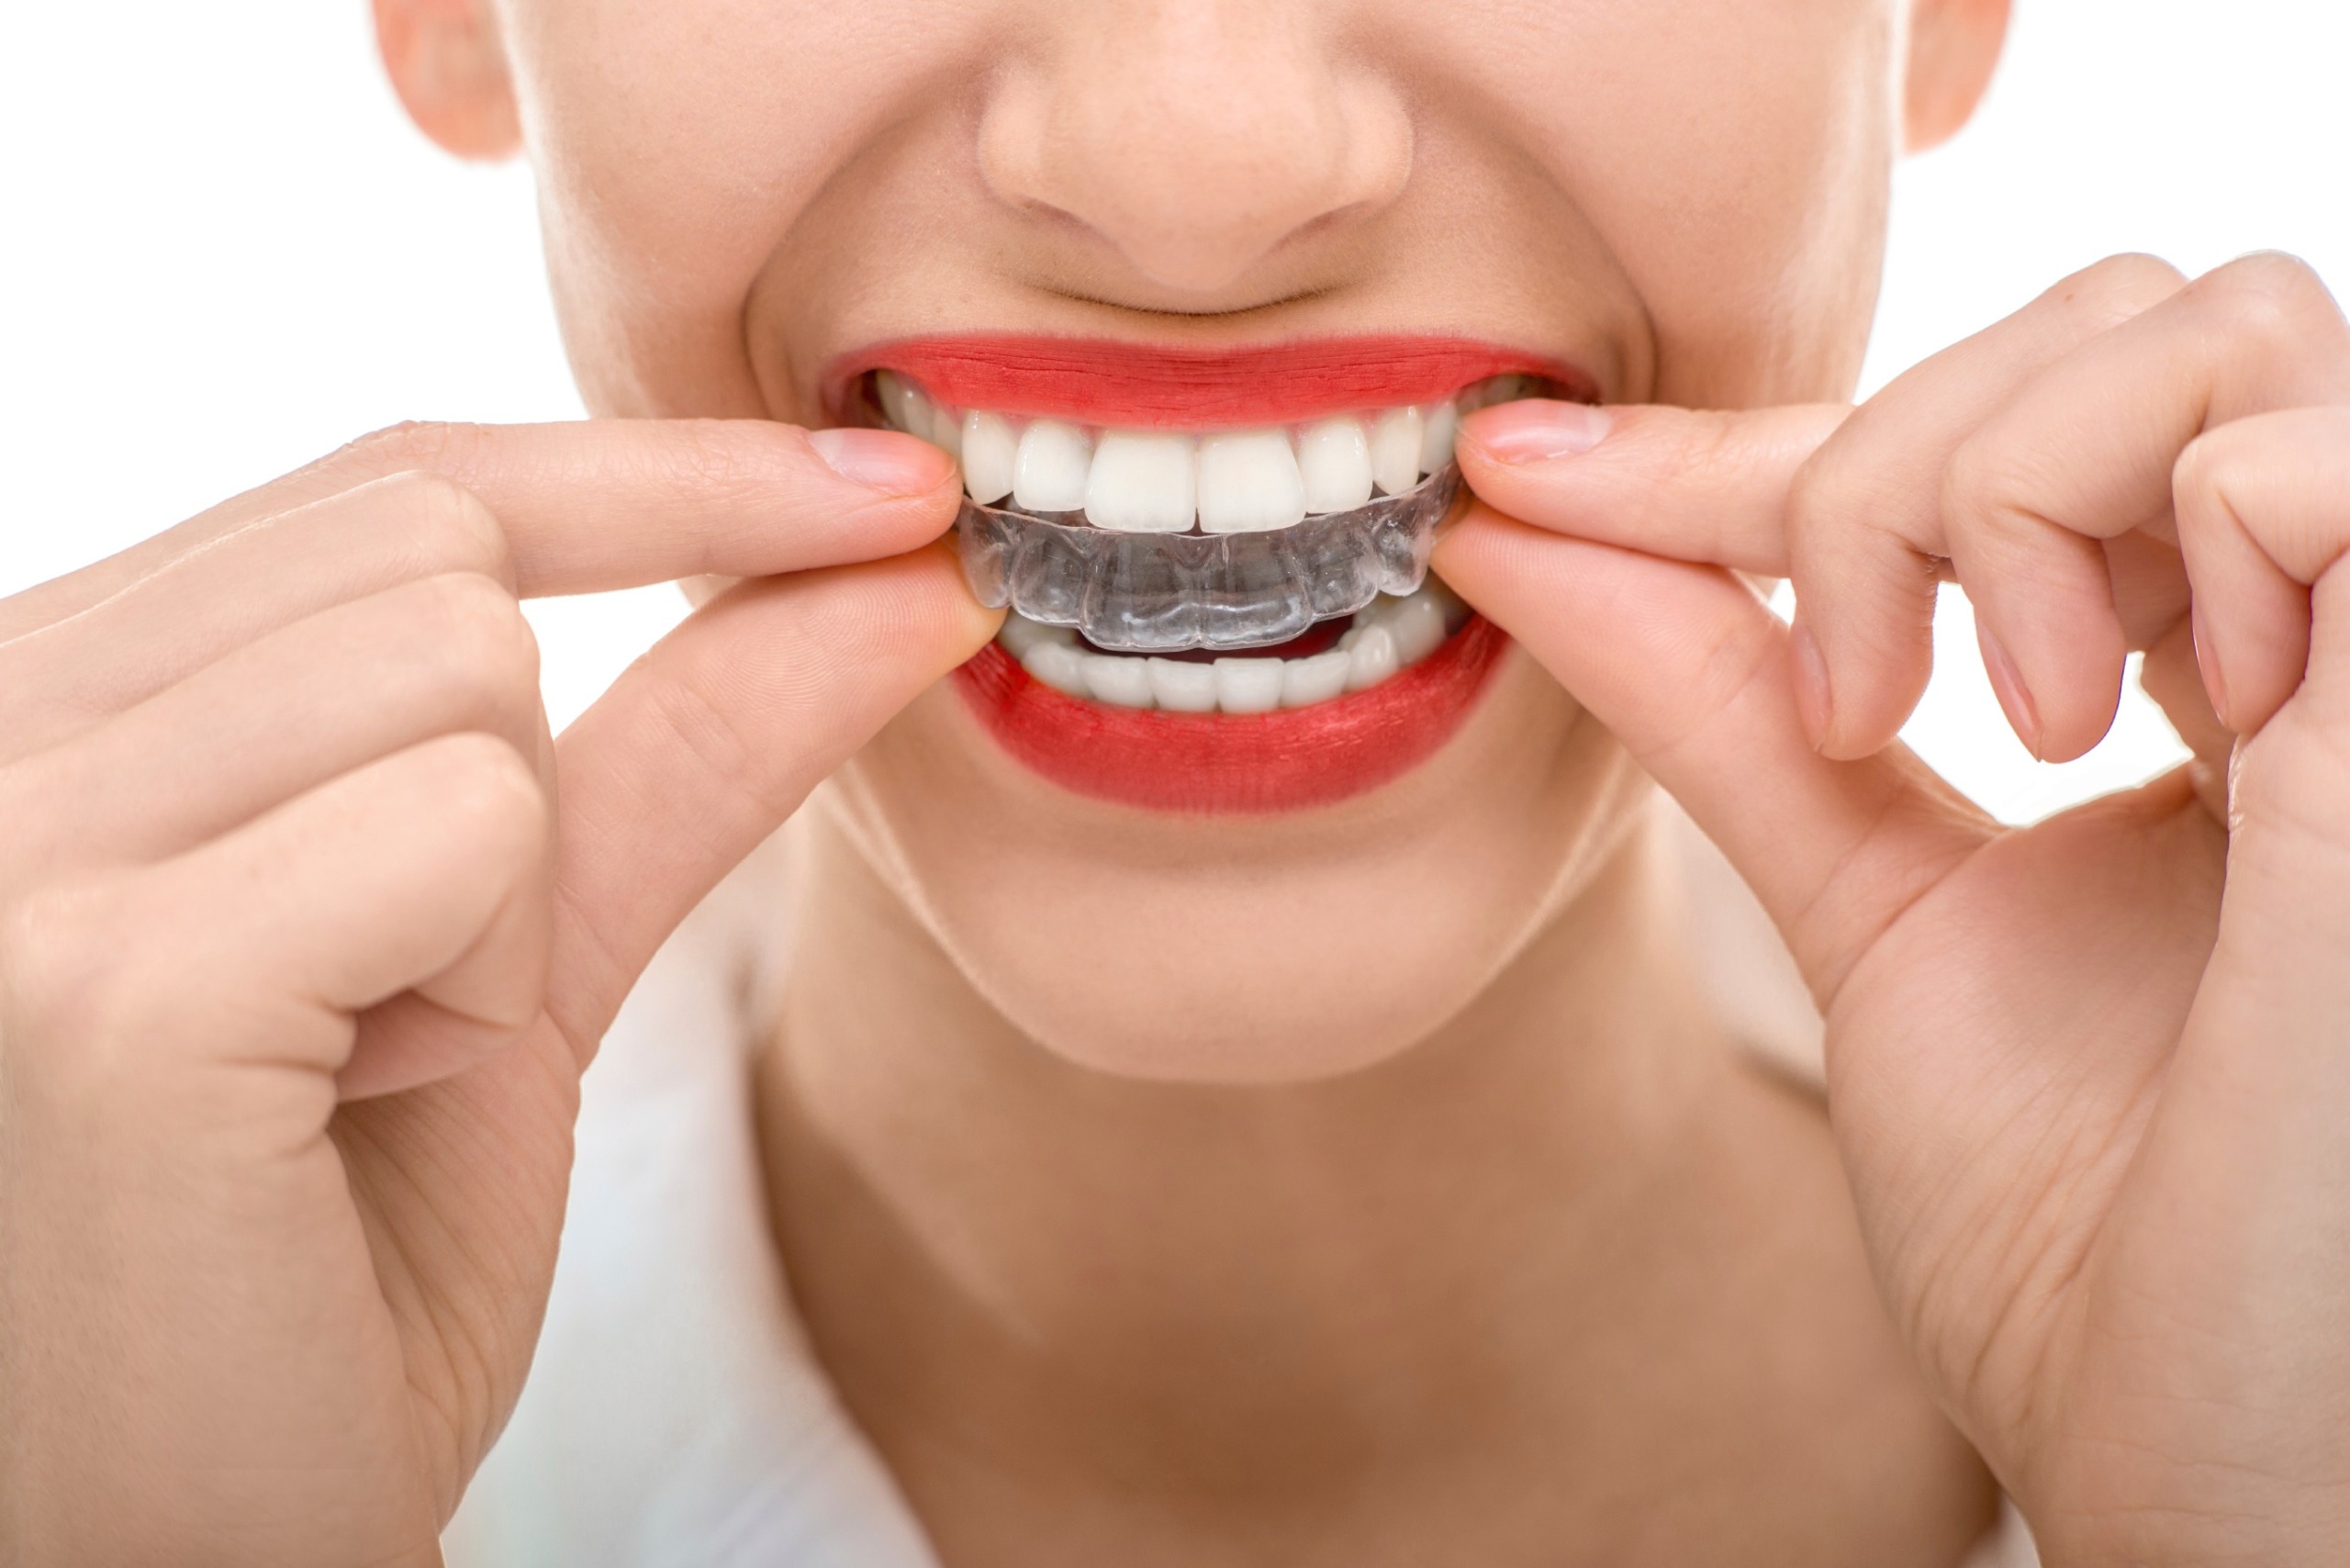 tips-to-make-Invisalign-unchallenging